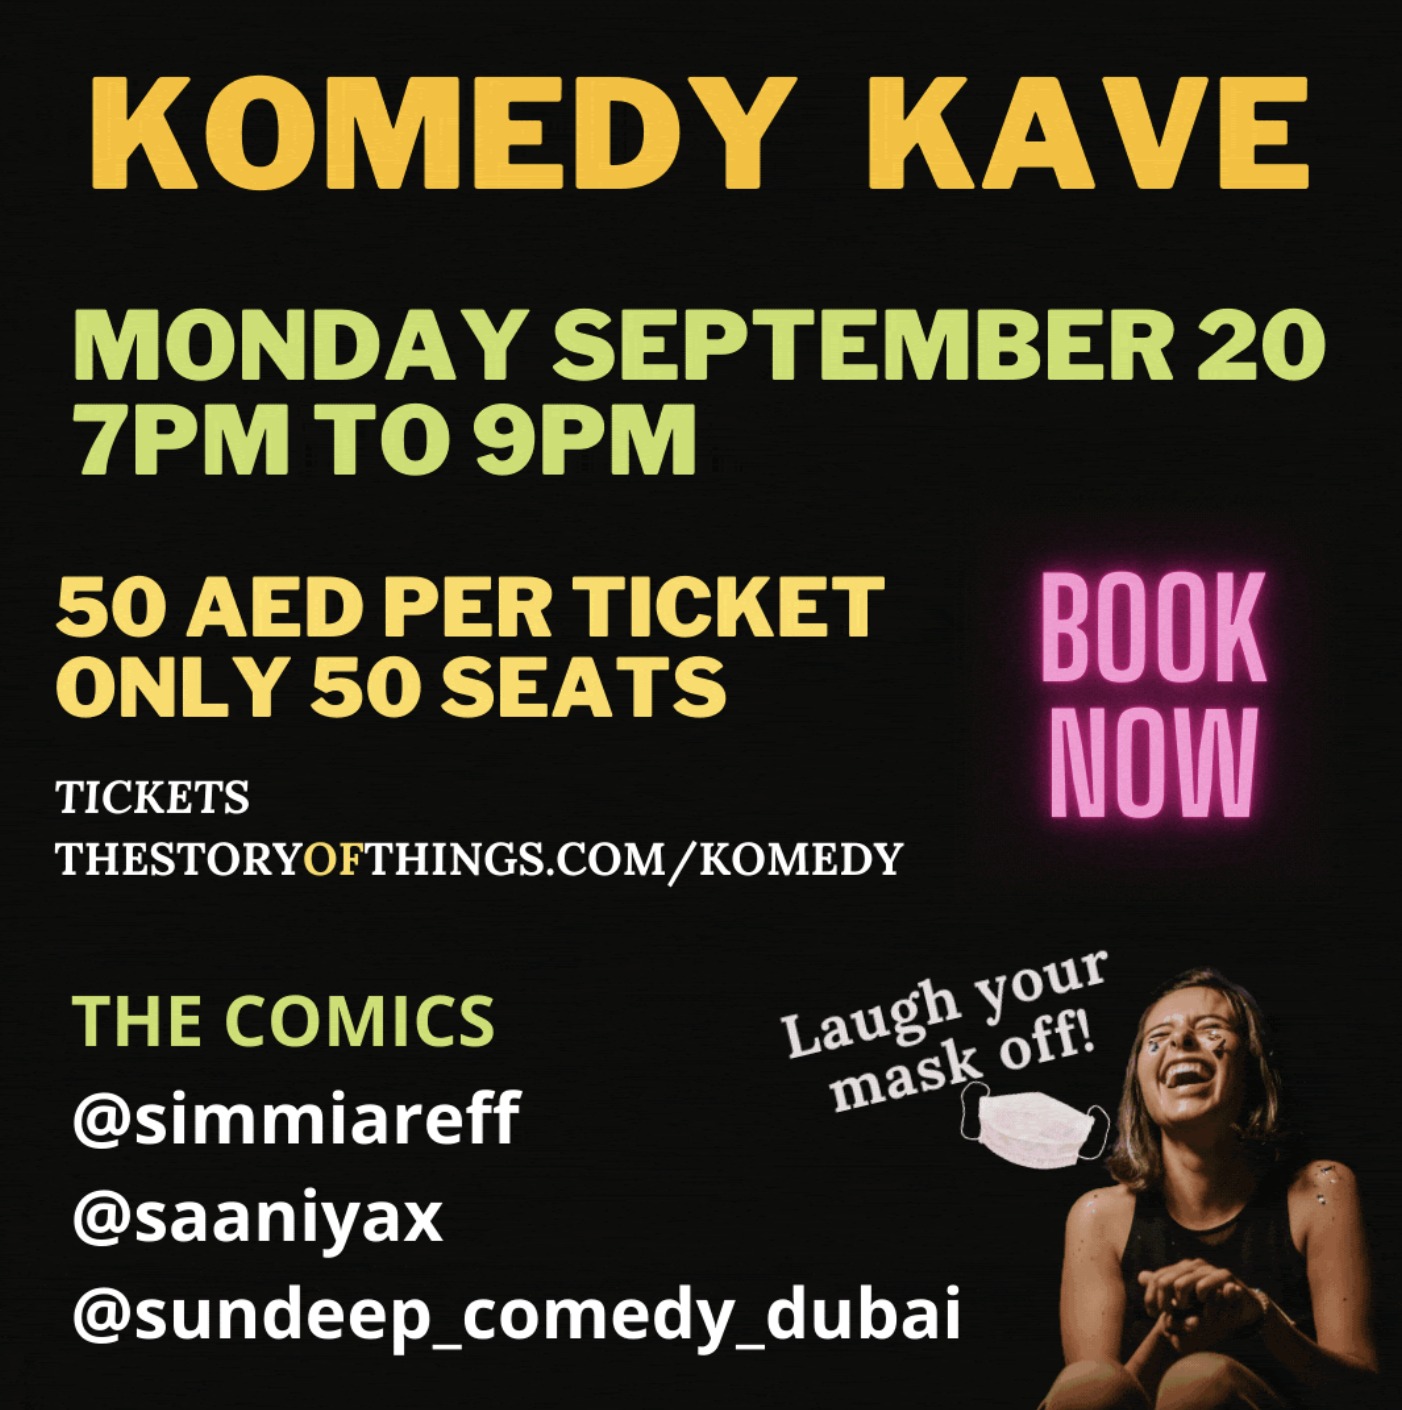 KOMEDY KAVE – Stand Up Comedy Night